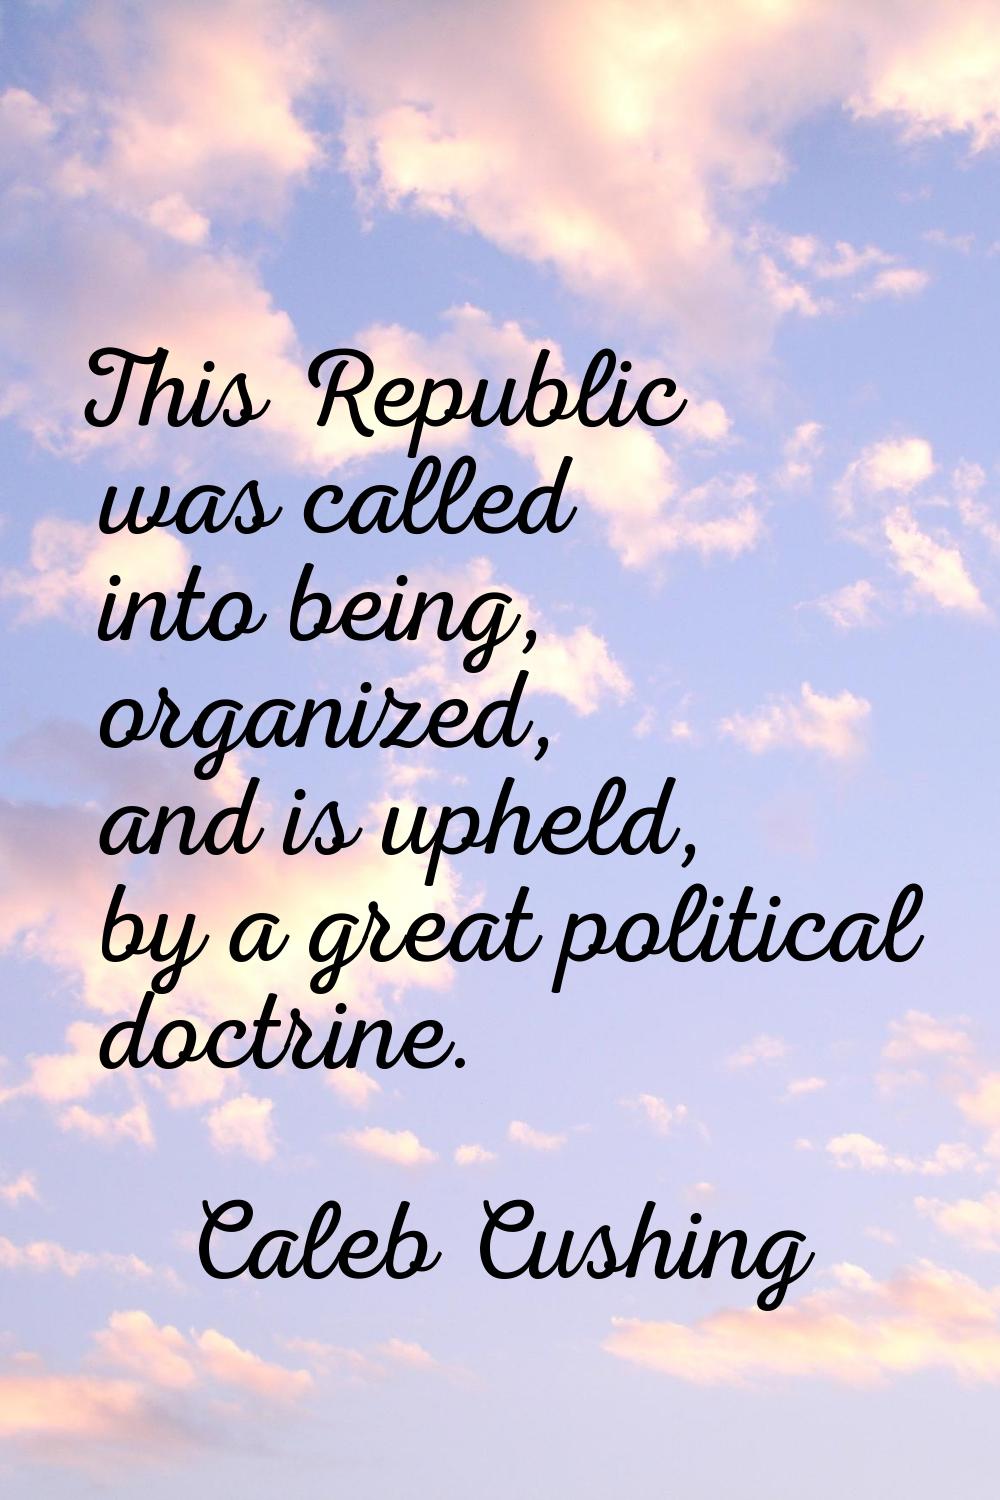 This Republic was called into being, organized, and is upheld, by a great political doctrine.